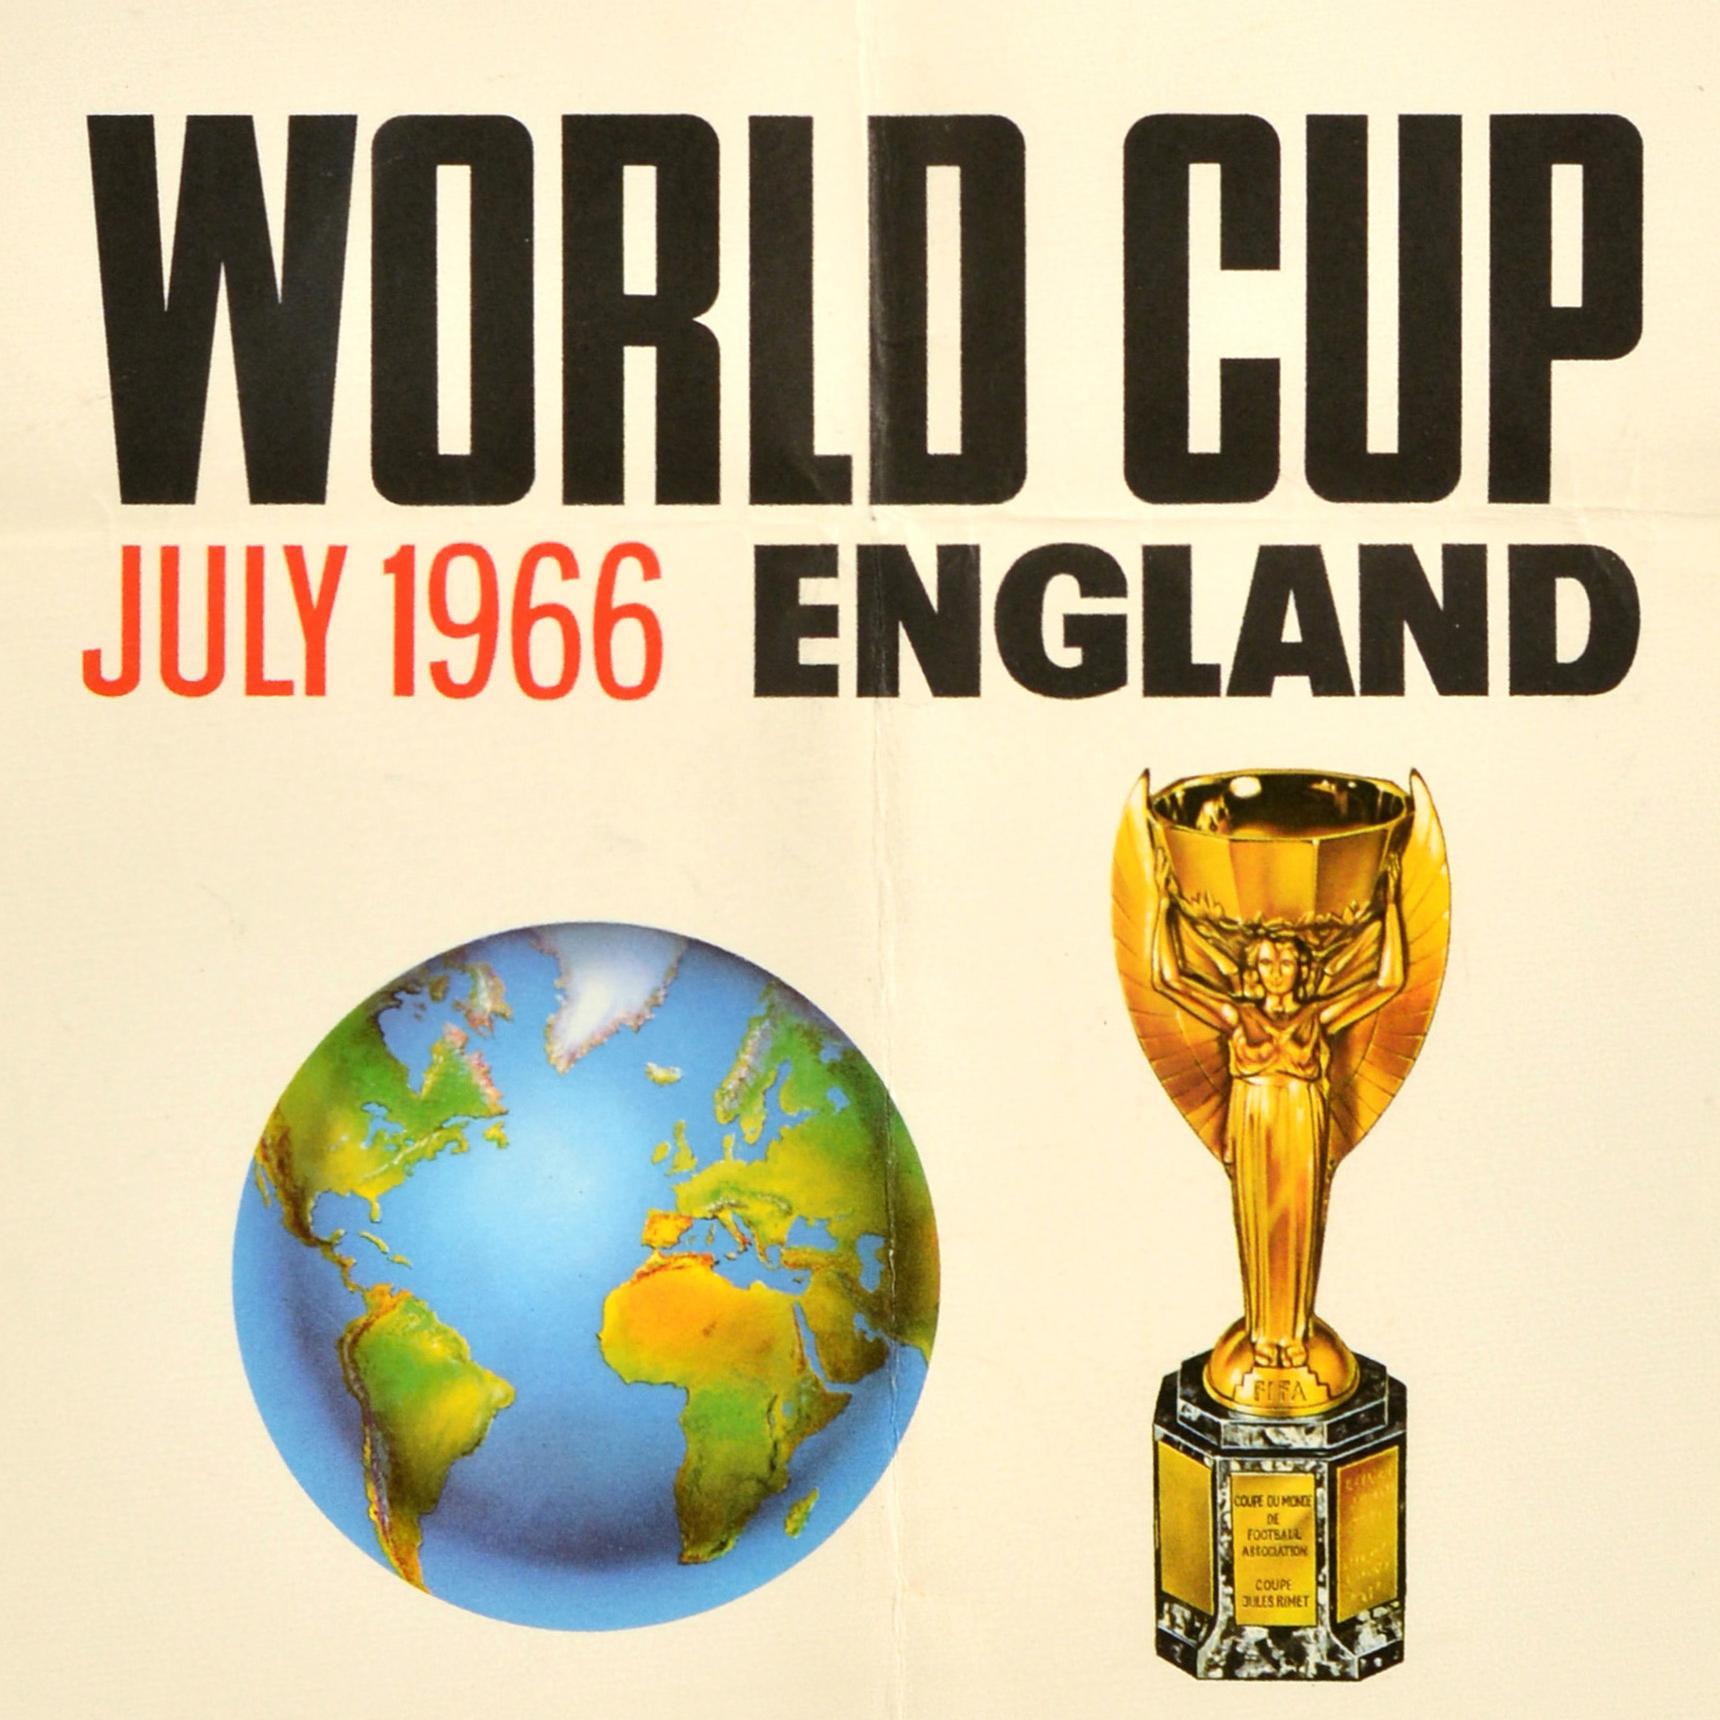 Original vintage sport poster - World Cup July 1966 England - featuring a football and the FIFA World Championship tournament logo on a Union Jack flag background above the bold title text in black and red in the centre with a globe and the Jules